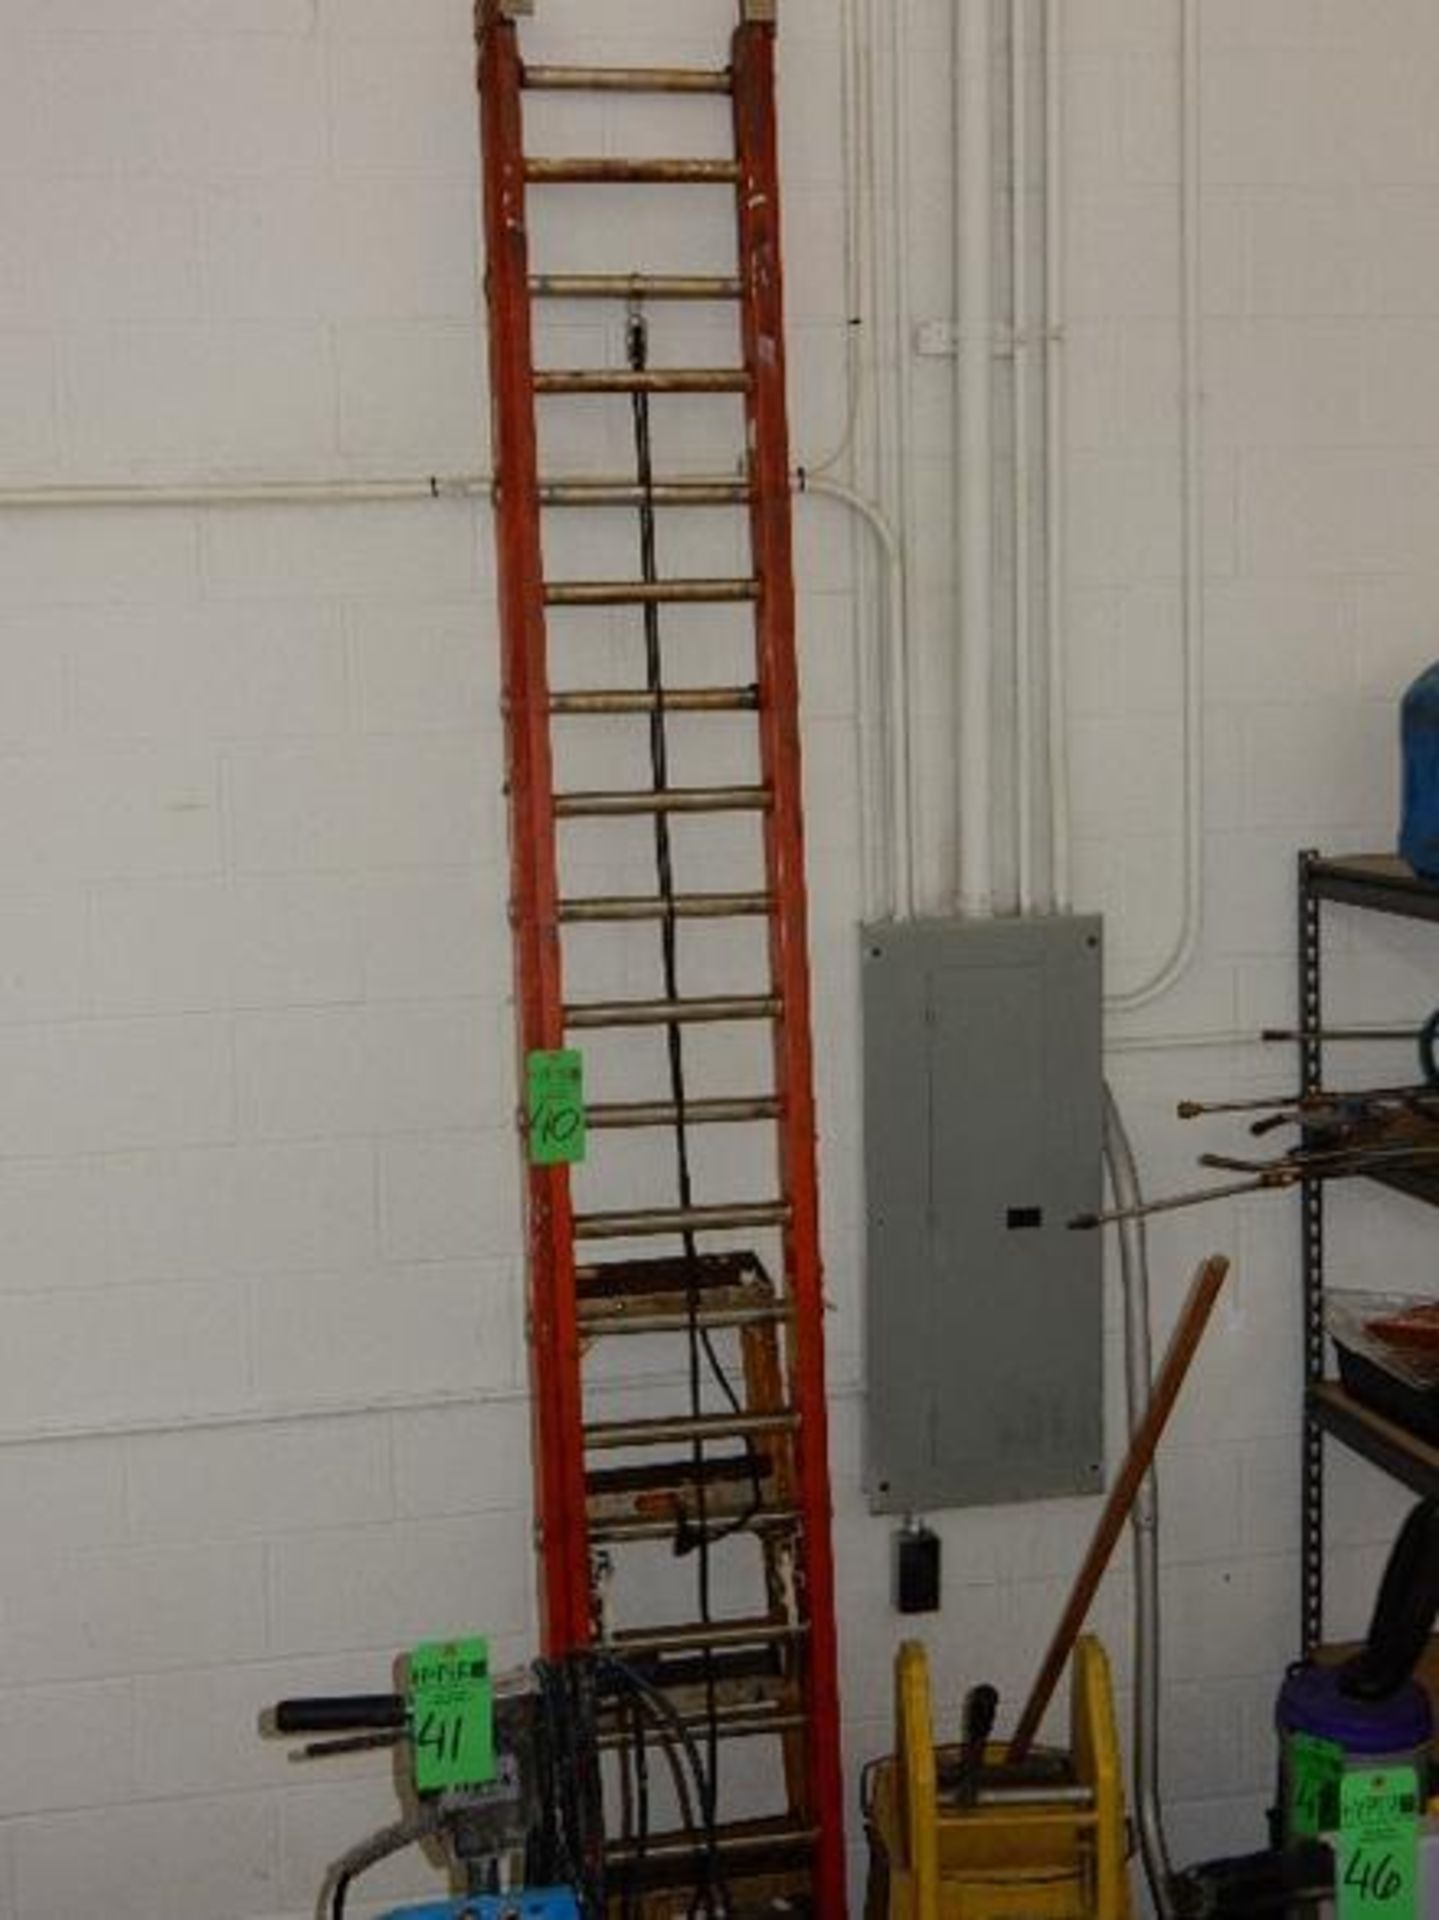 Fiberglass 16 ft. Type I Extension Ladder with additional 4 ft. Step Ladder type I - Image 4 of 4